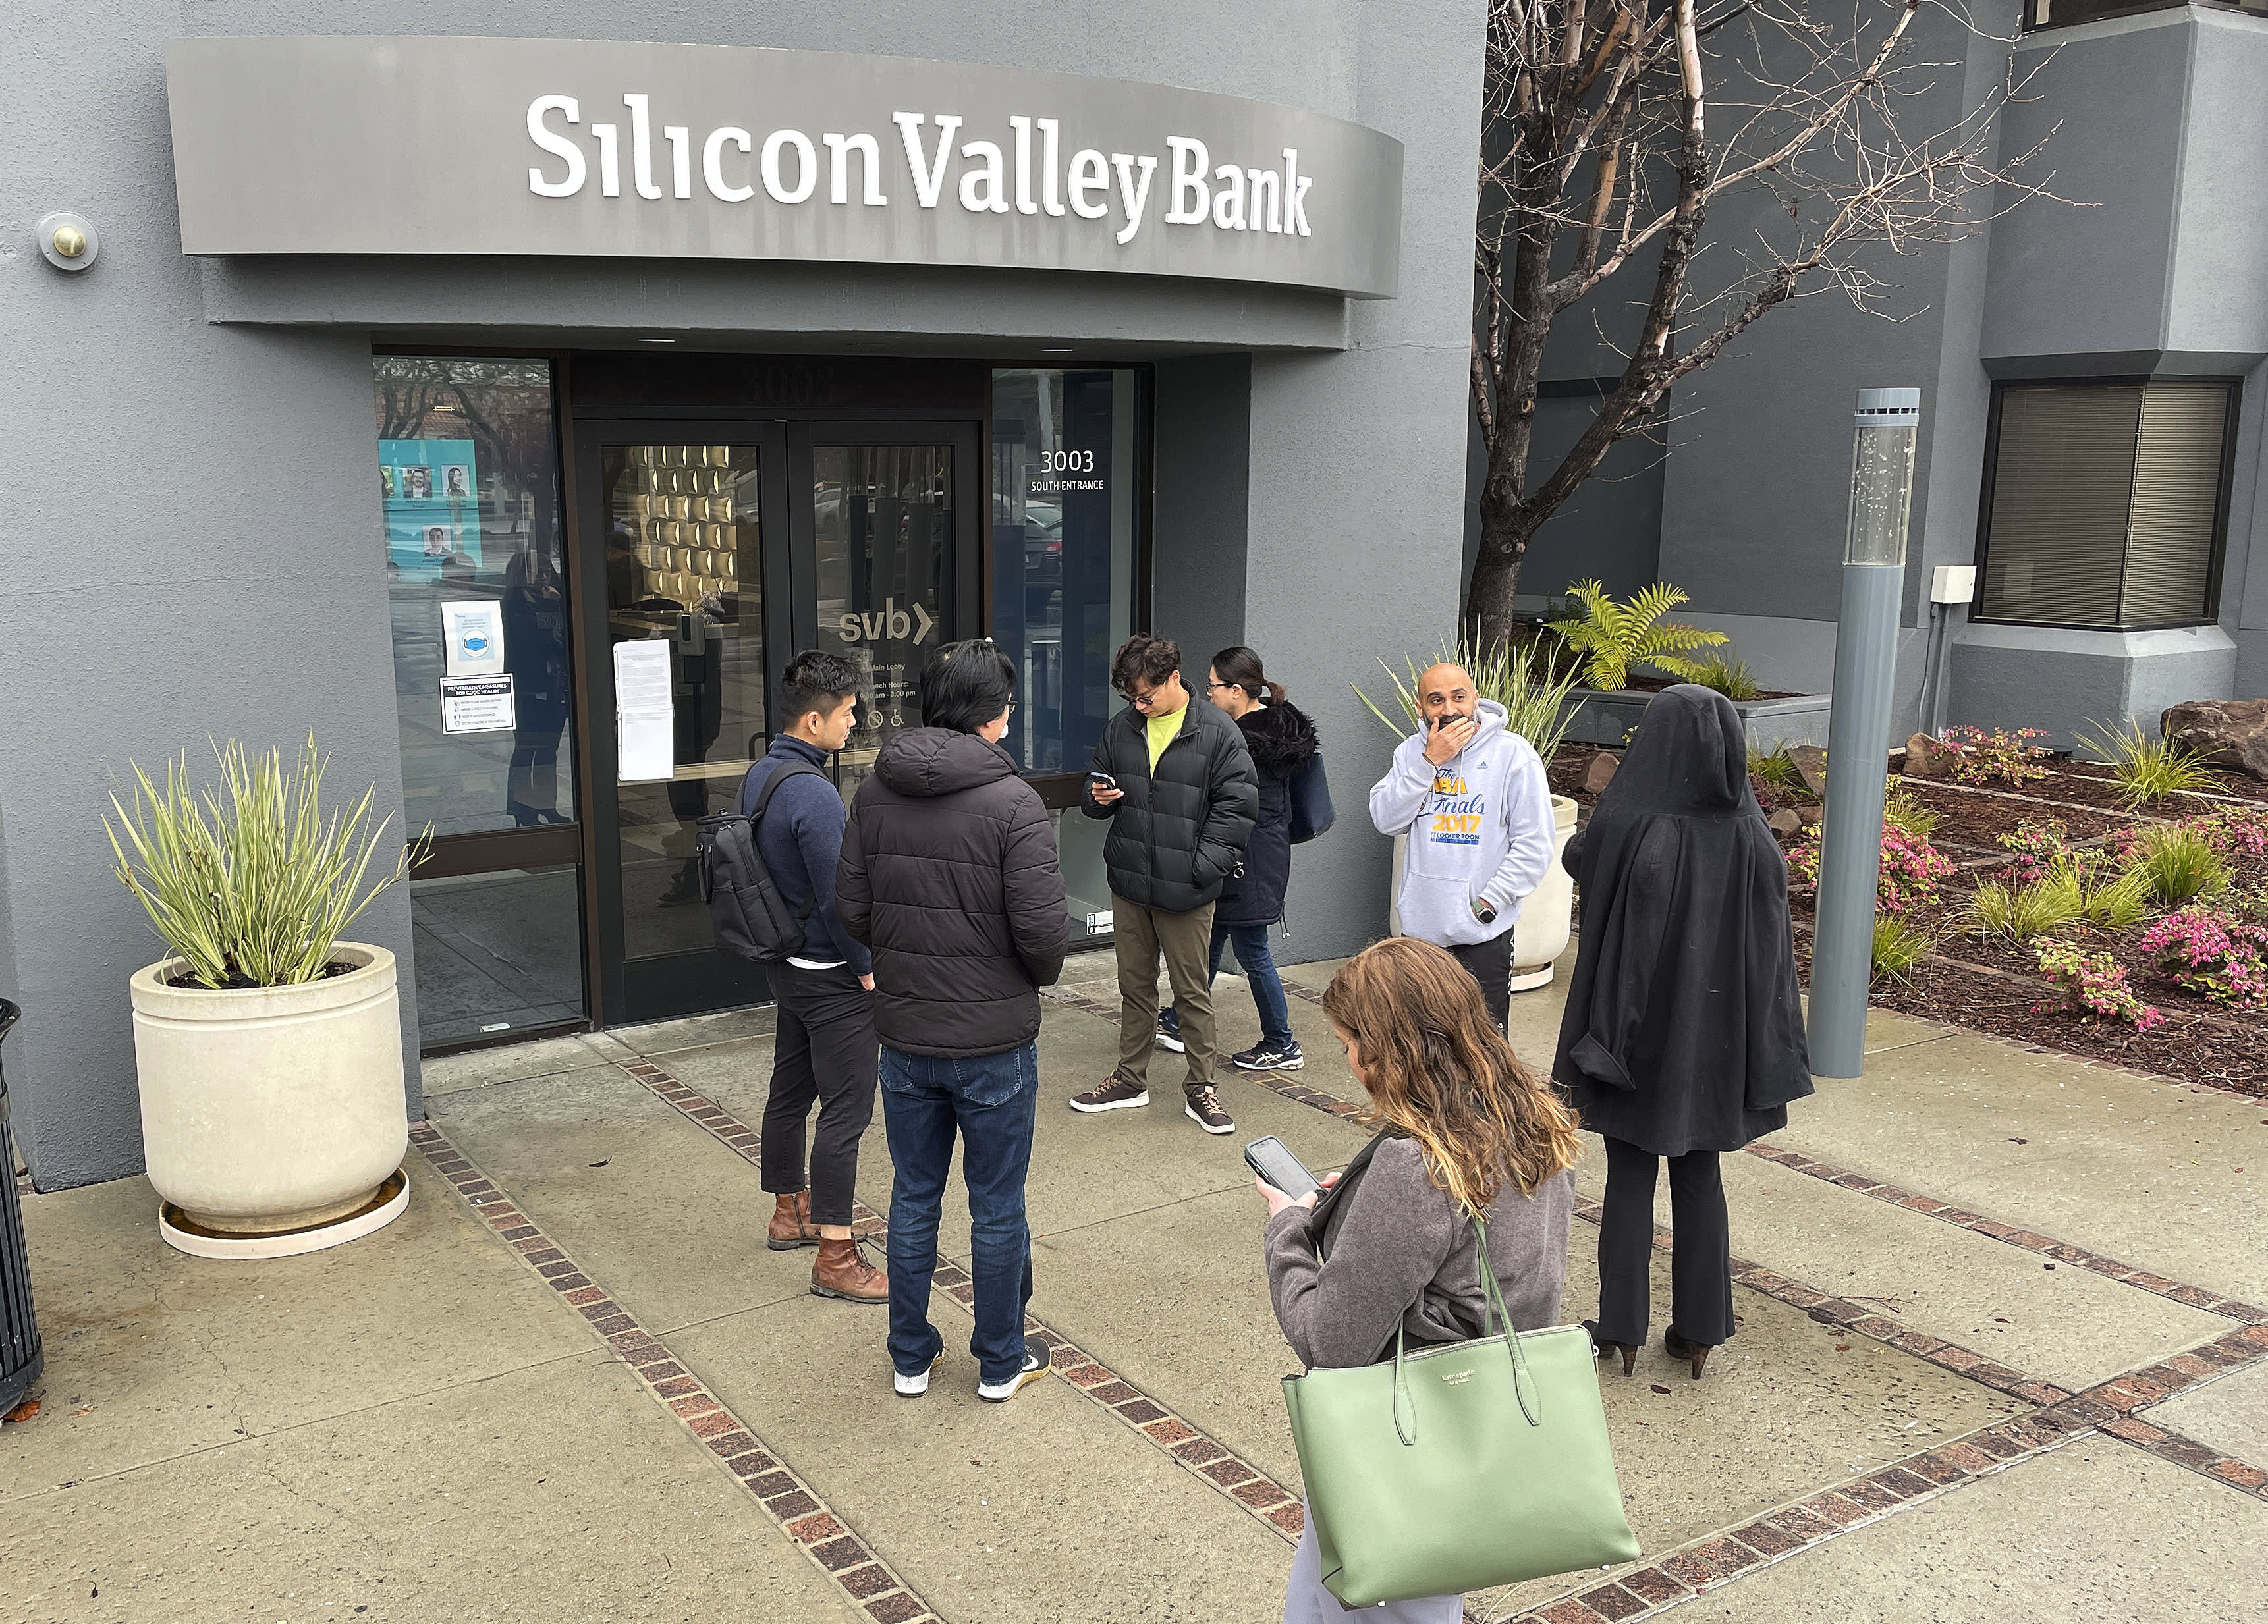 Silicon Valley Bank is shut down by regulators in biggest bank failure since global financial crisis